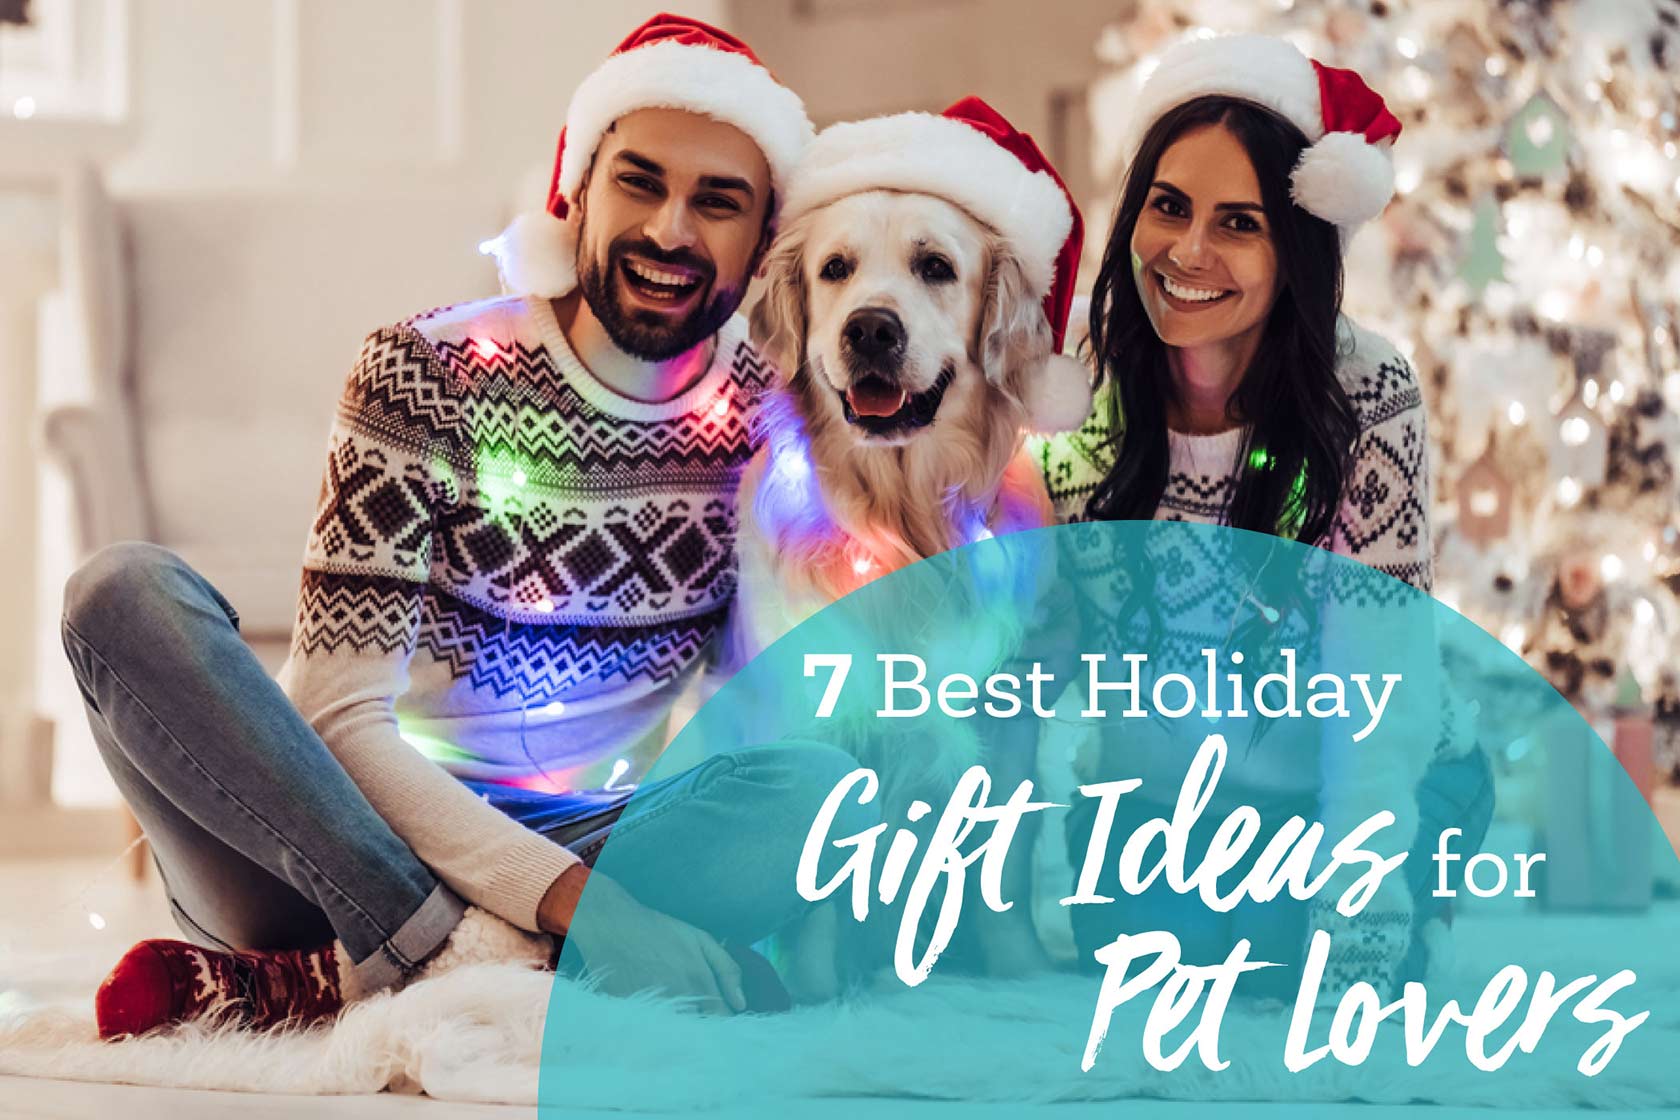 7 Best Holiday Gift Ideas for Pet Lovers